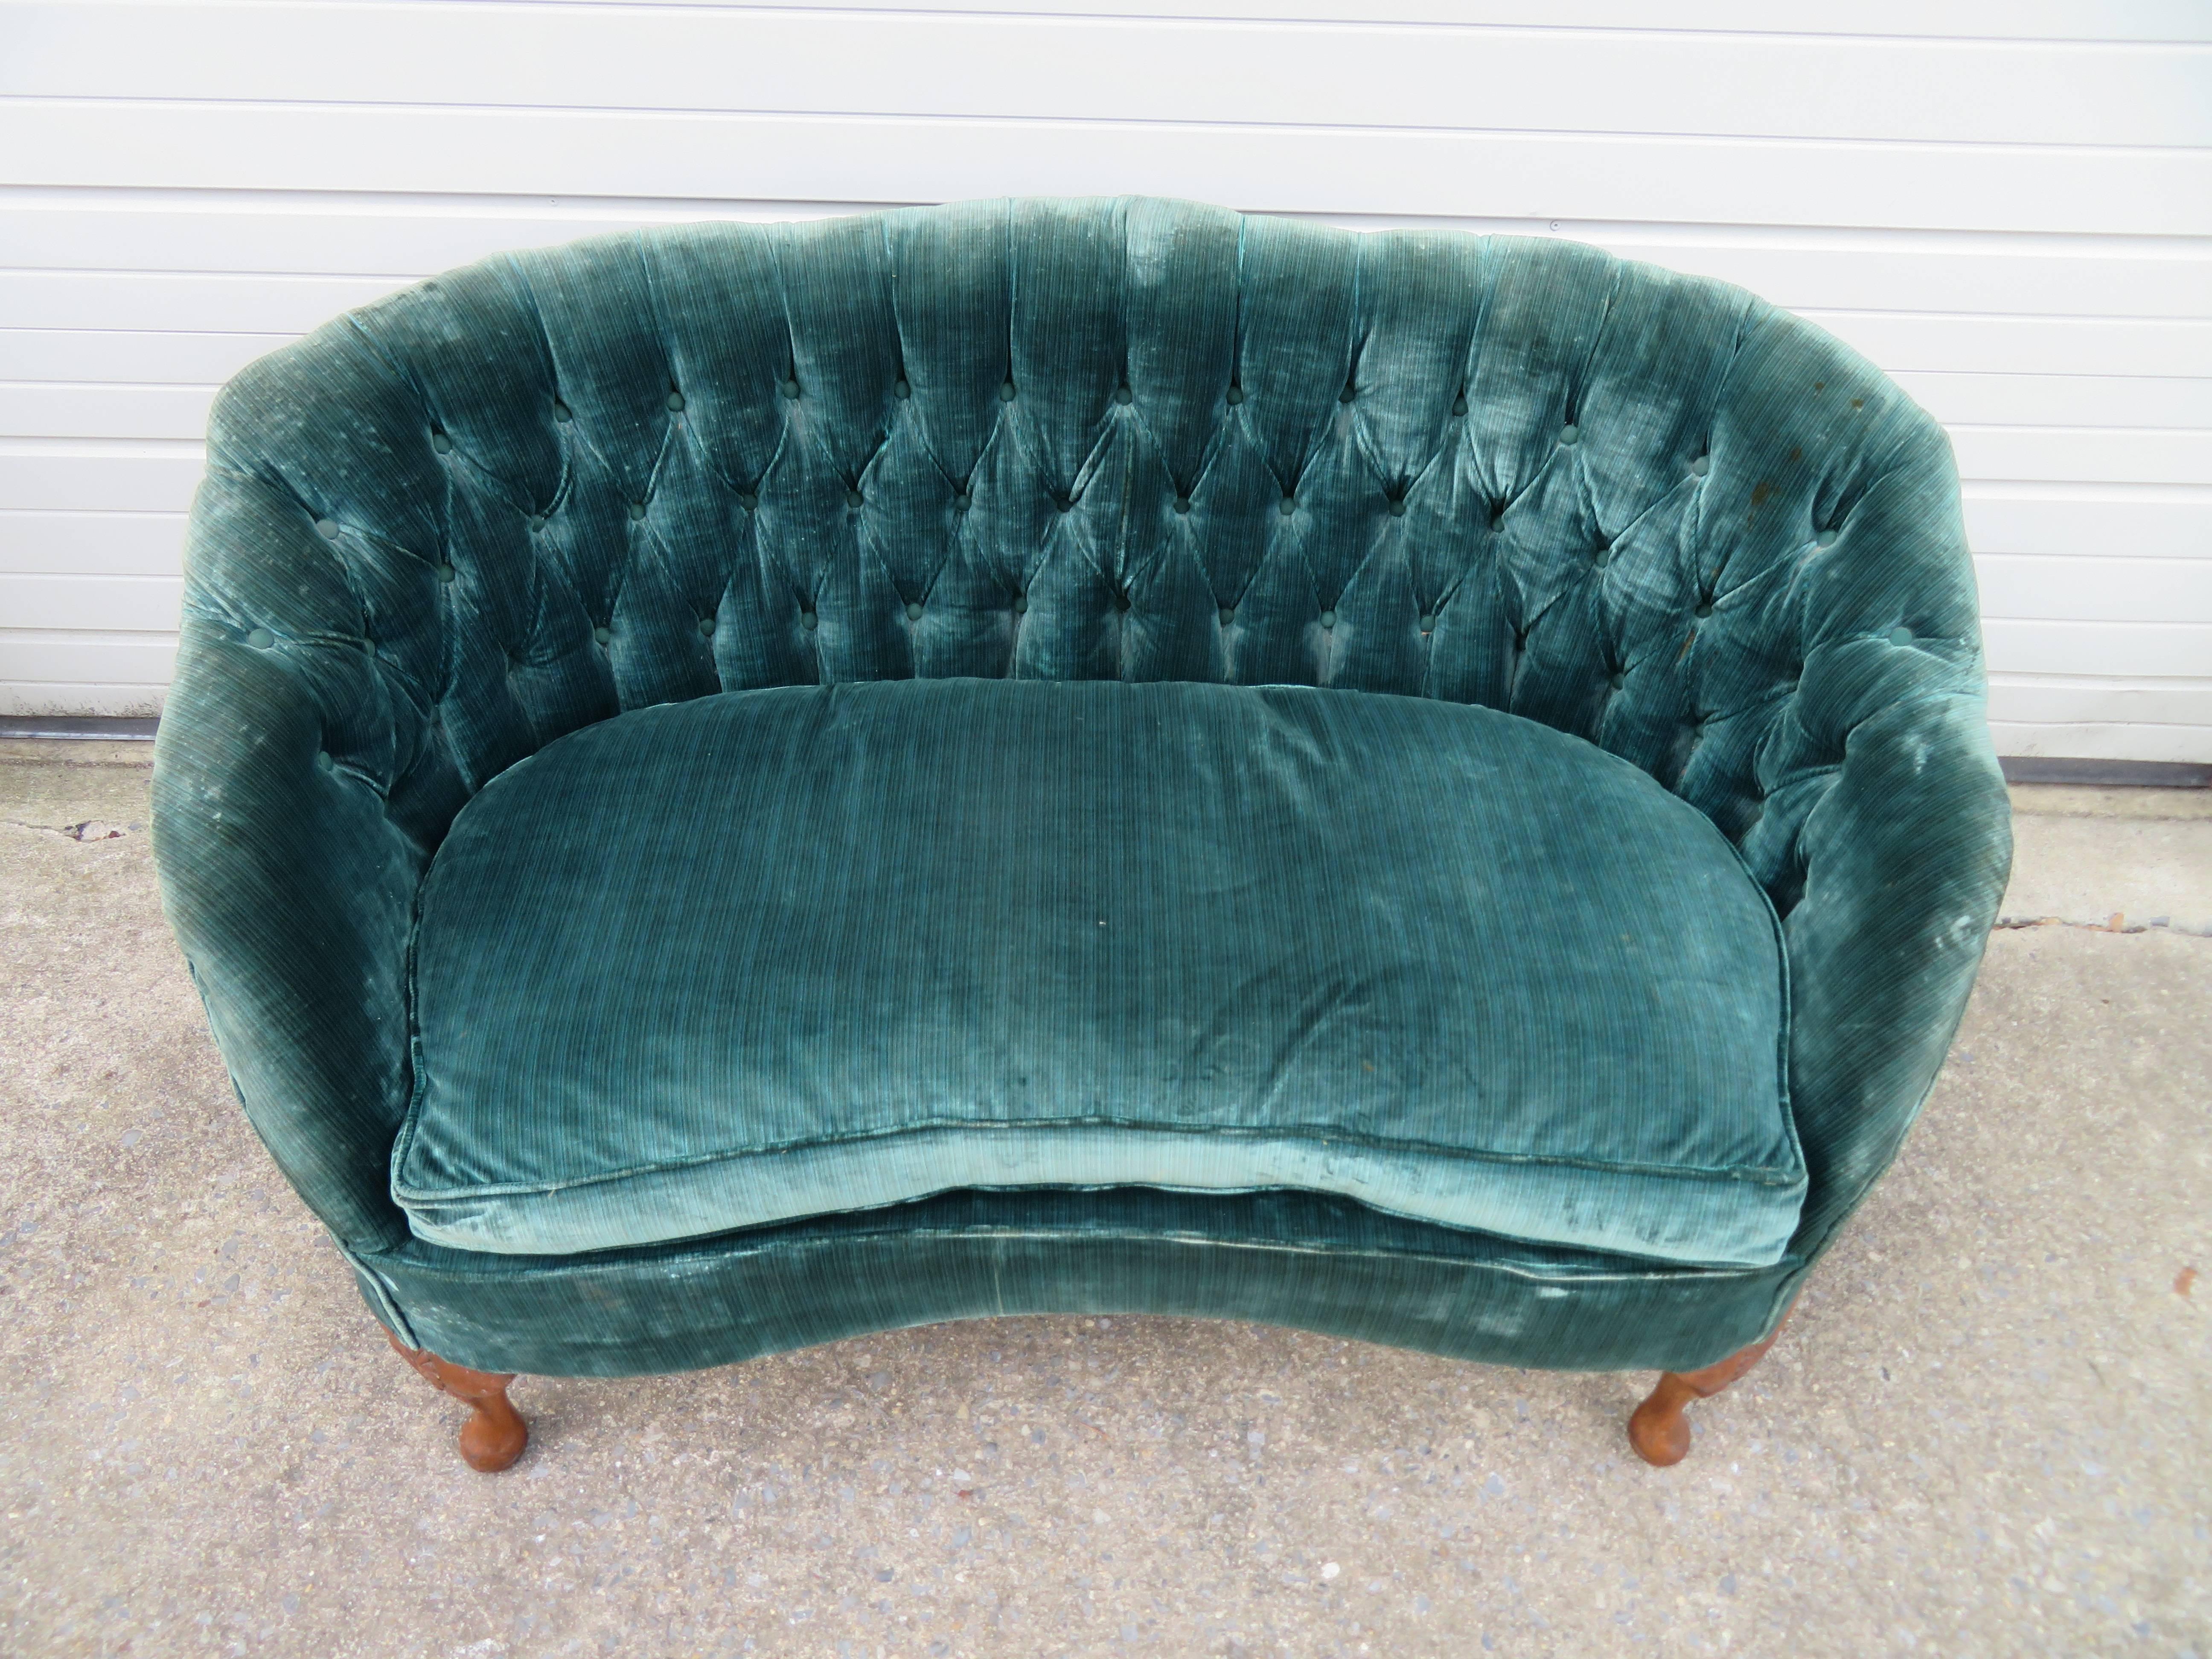 Lovely petite Hollywood Regency tufted loveseat with a down filled lose seat cushion. This piece will definitely need to be re-upholstered but that's what you designers are looking for -right?